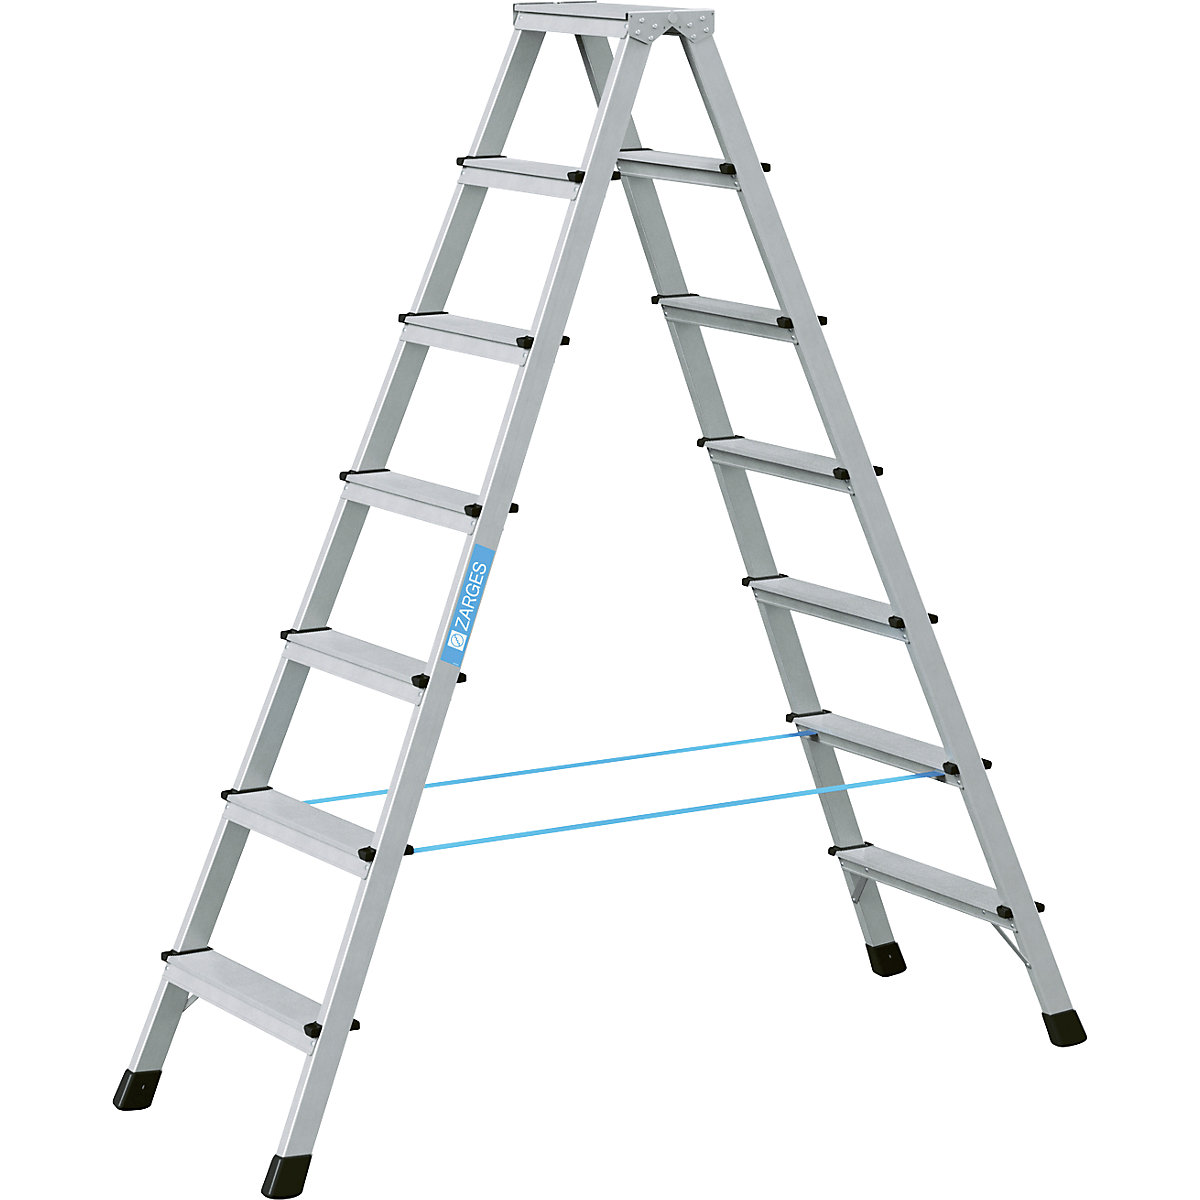 Professional step ladder, anodised – ZARGES, double sided, 2 x 7 steps-6